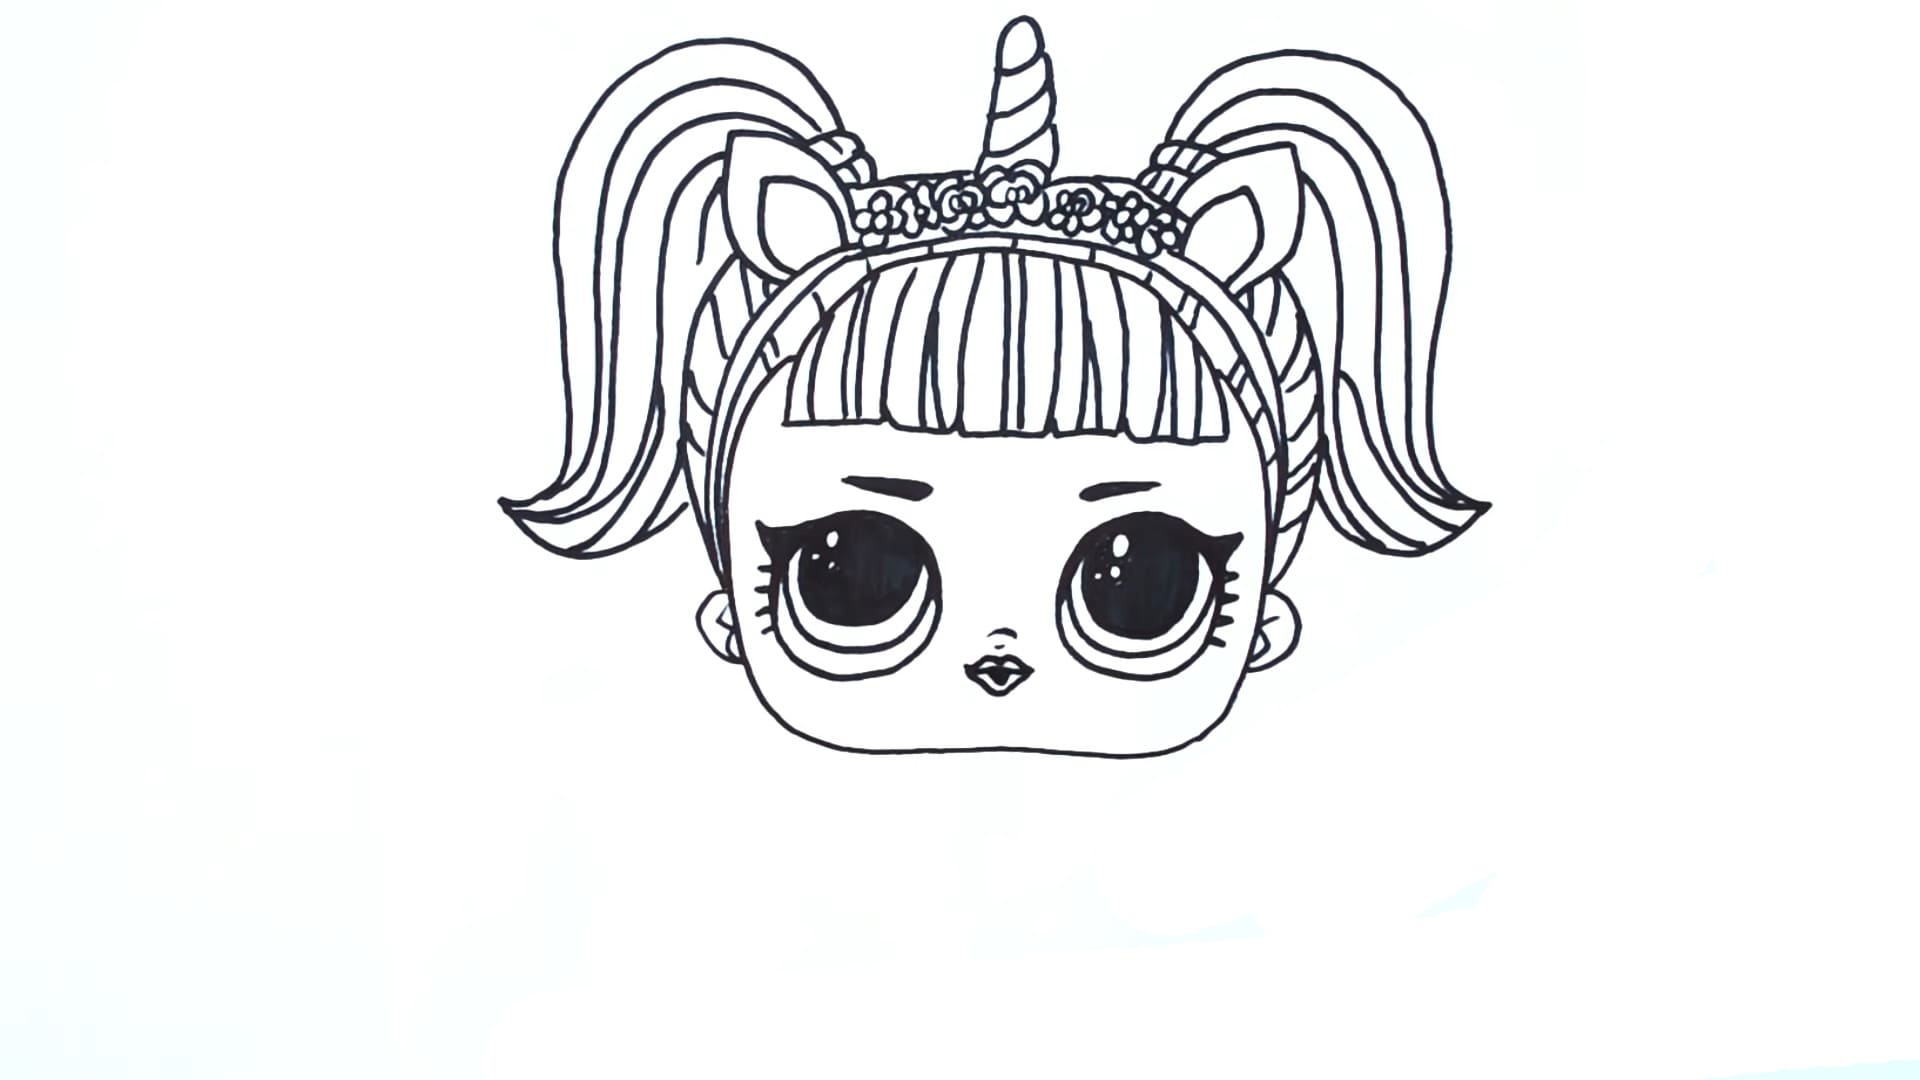 How To Draw Lol Doll With Pencil According To Instructions Fast